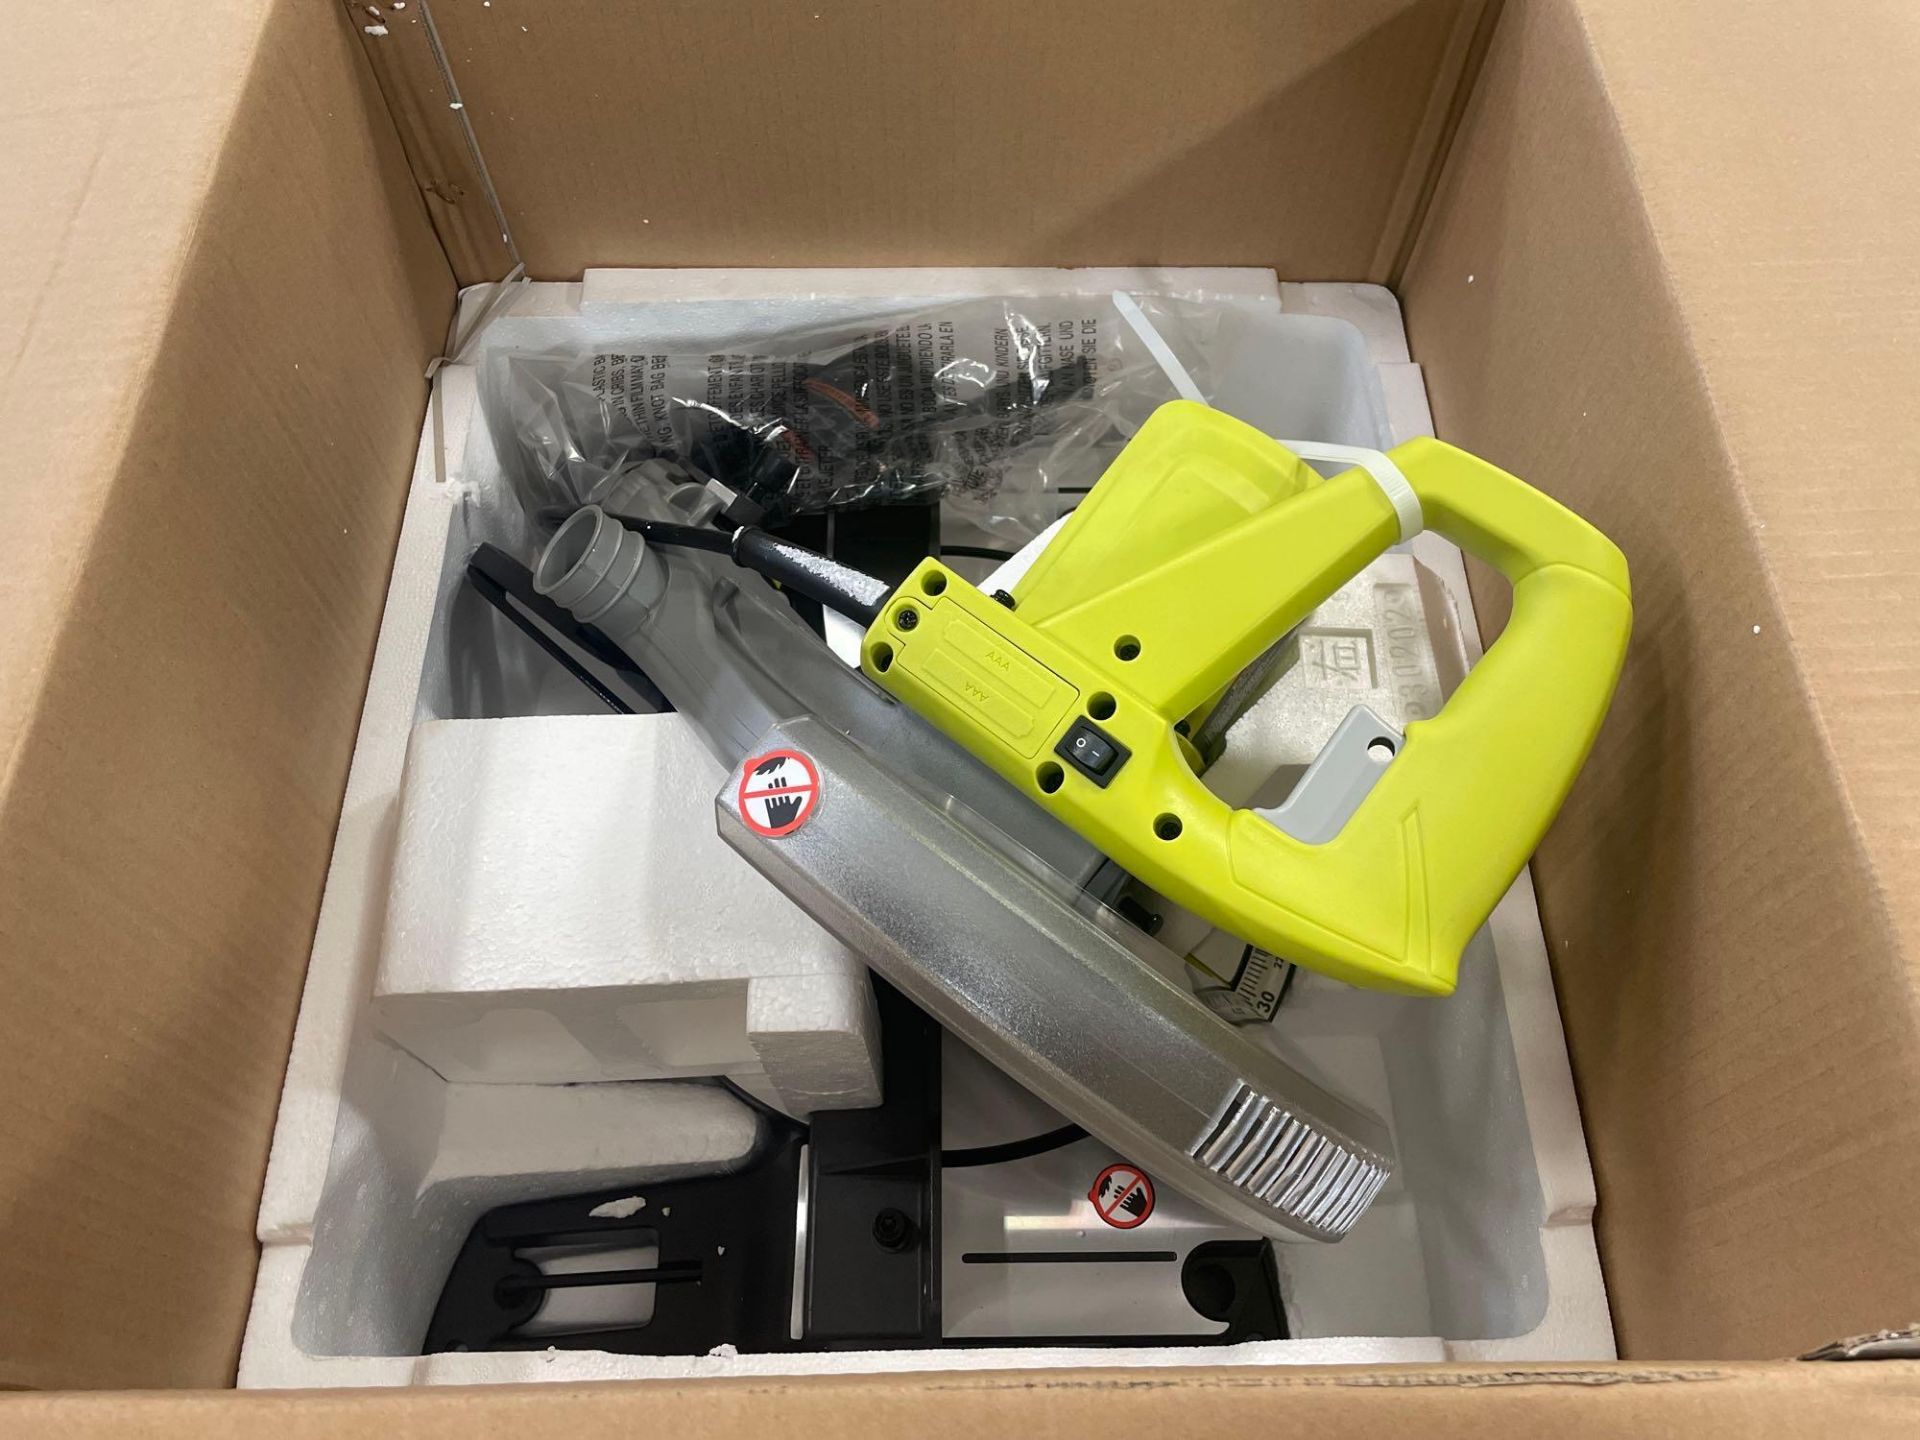 New Ryobi 10" Compound Miter Saw with Laser - Image 3 of 6